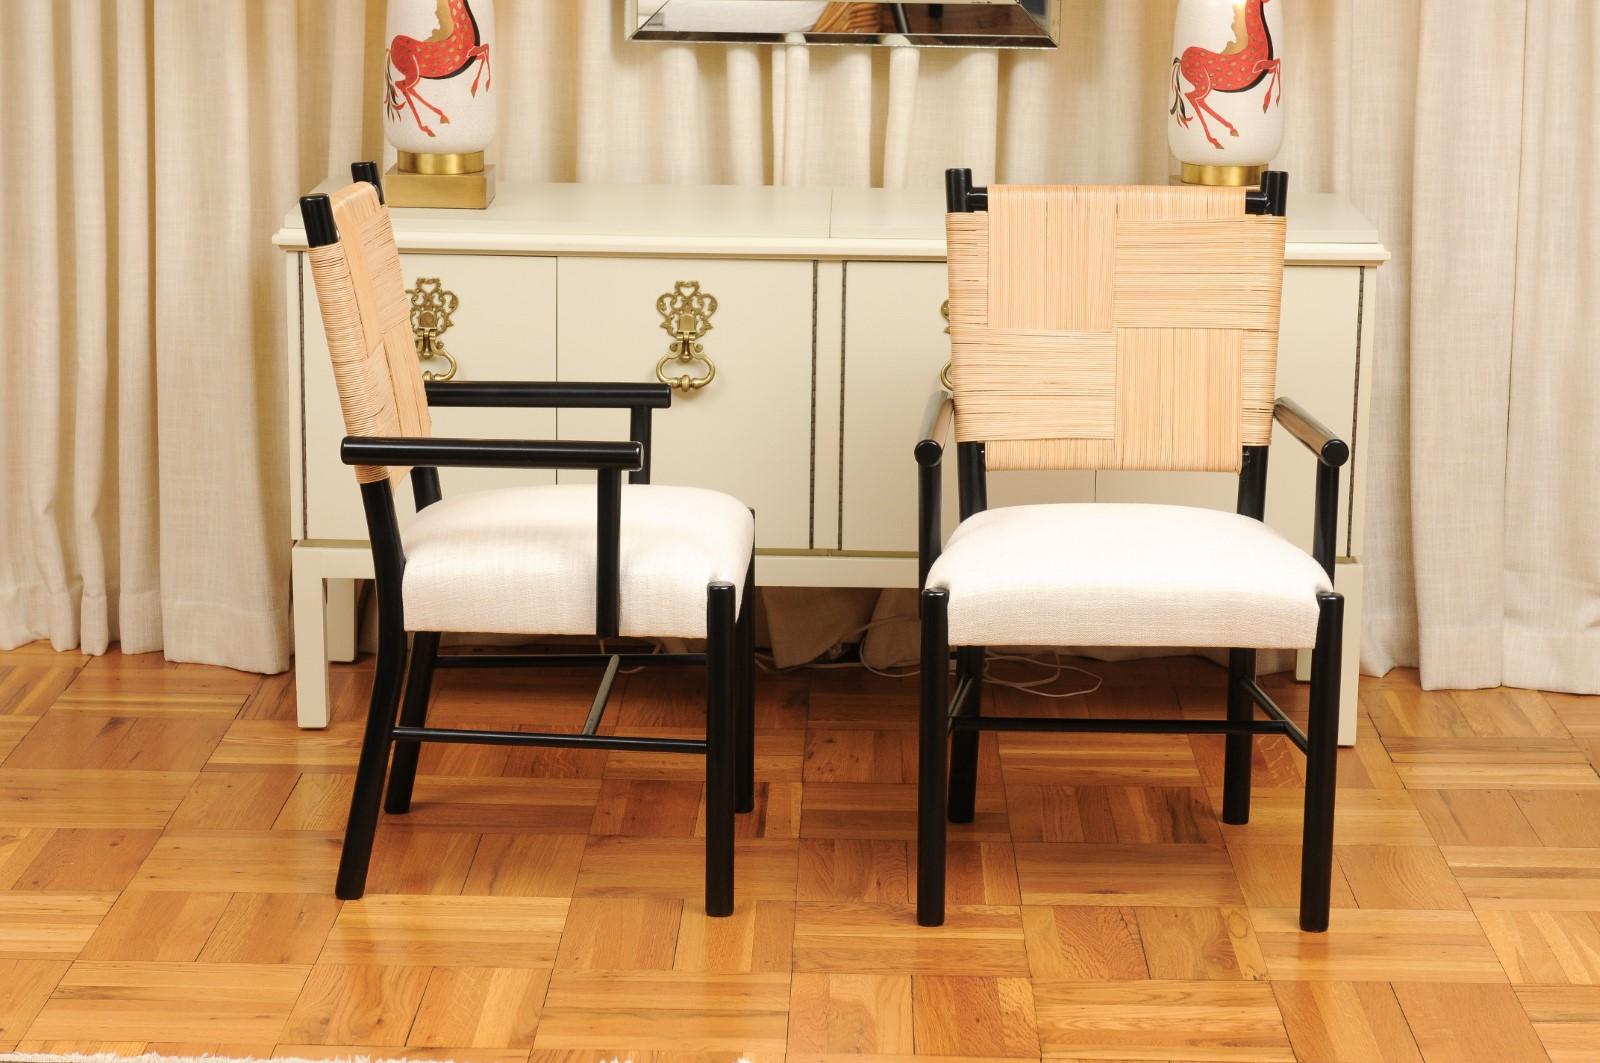 All Arms- Sublime Set of 14 Cane Back Dining Chairs by John Hutton for Donghia For Sale 2